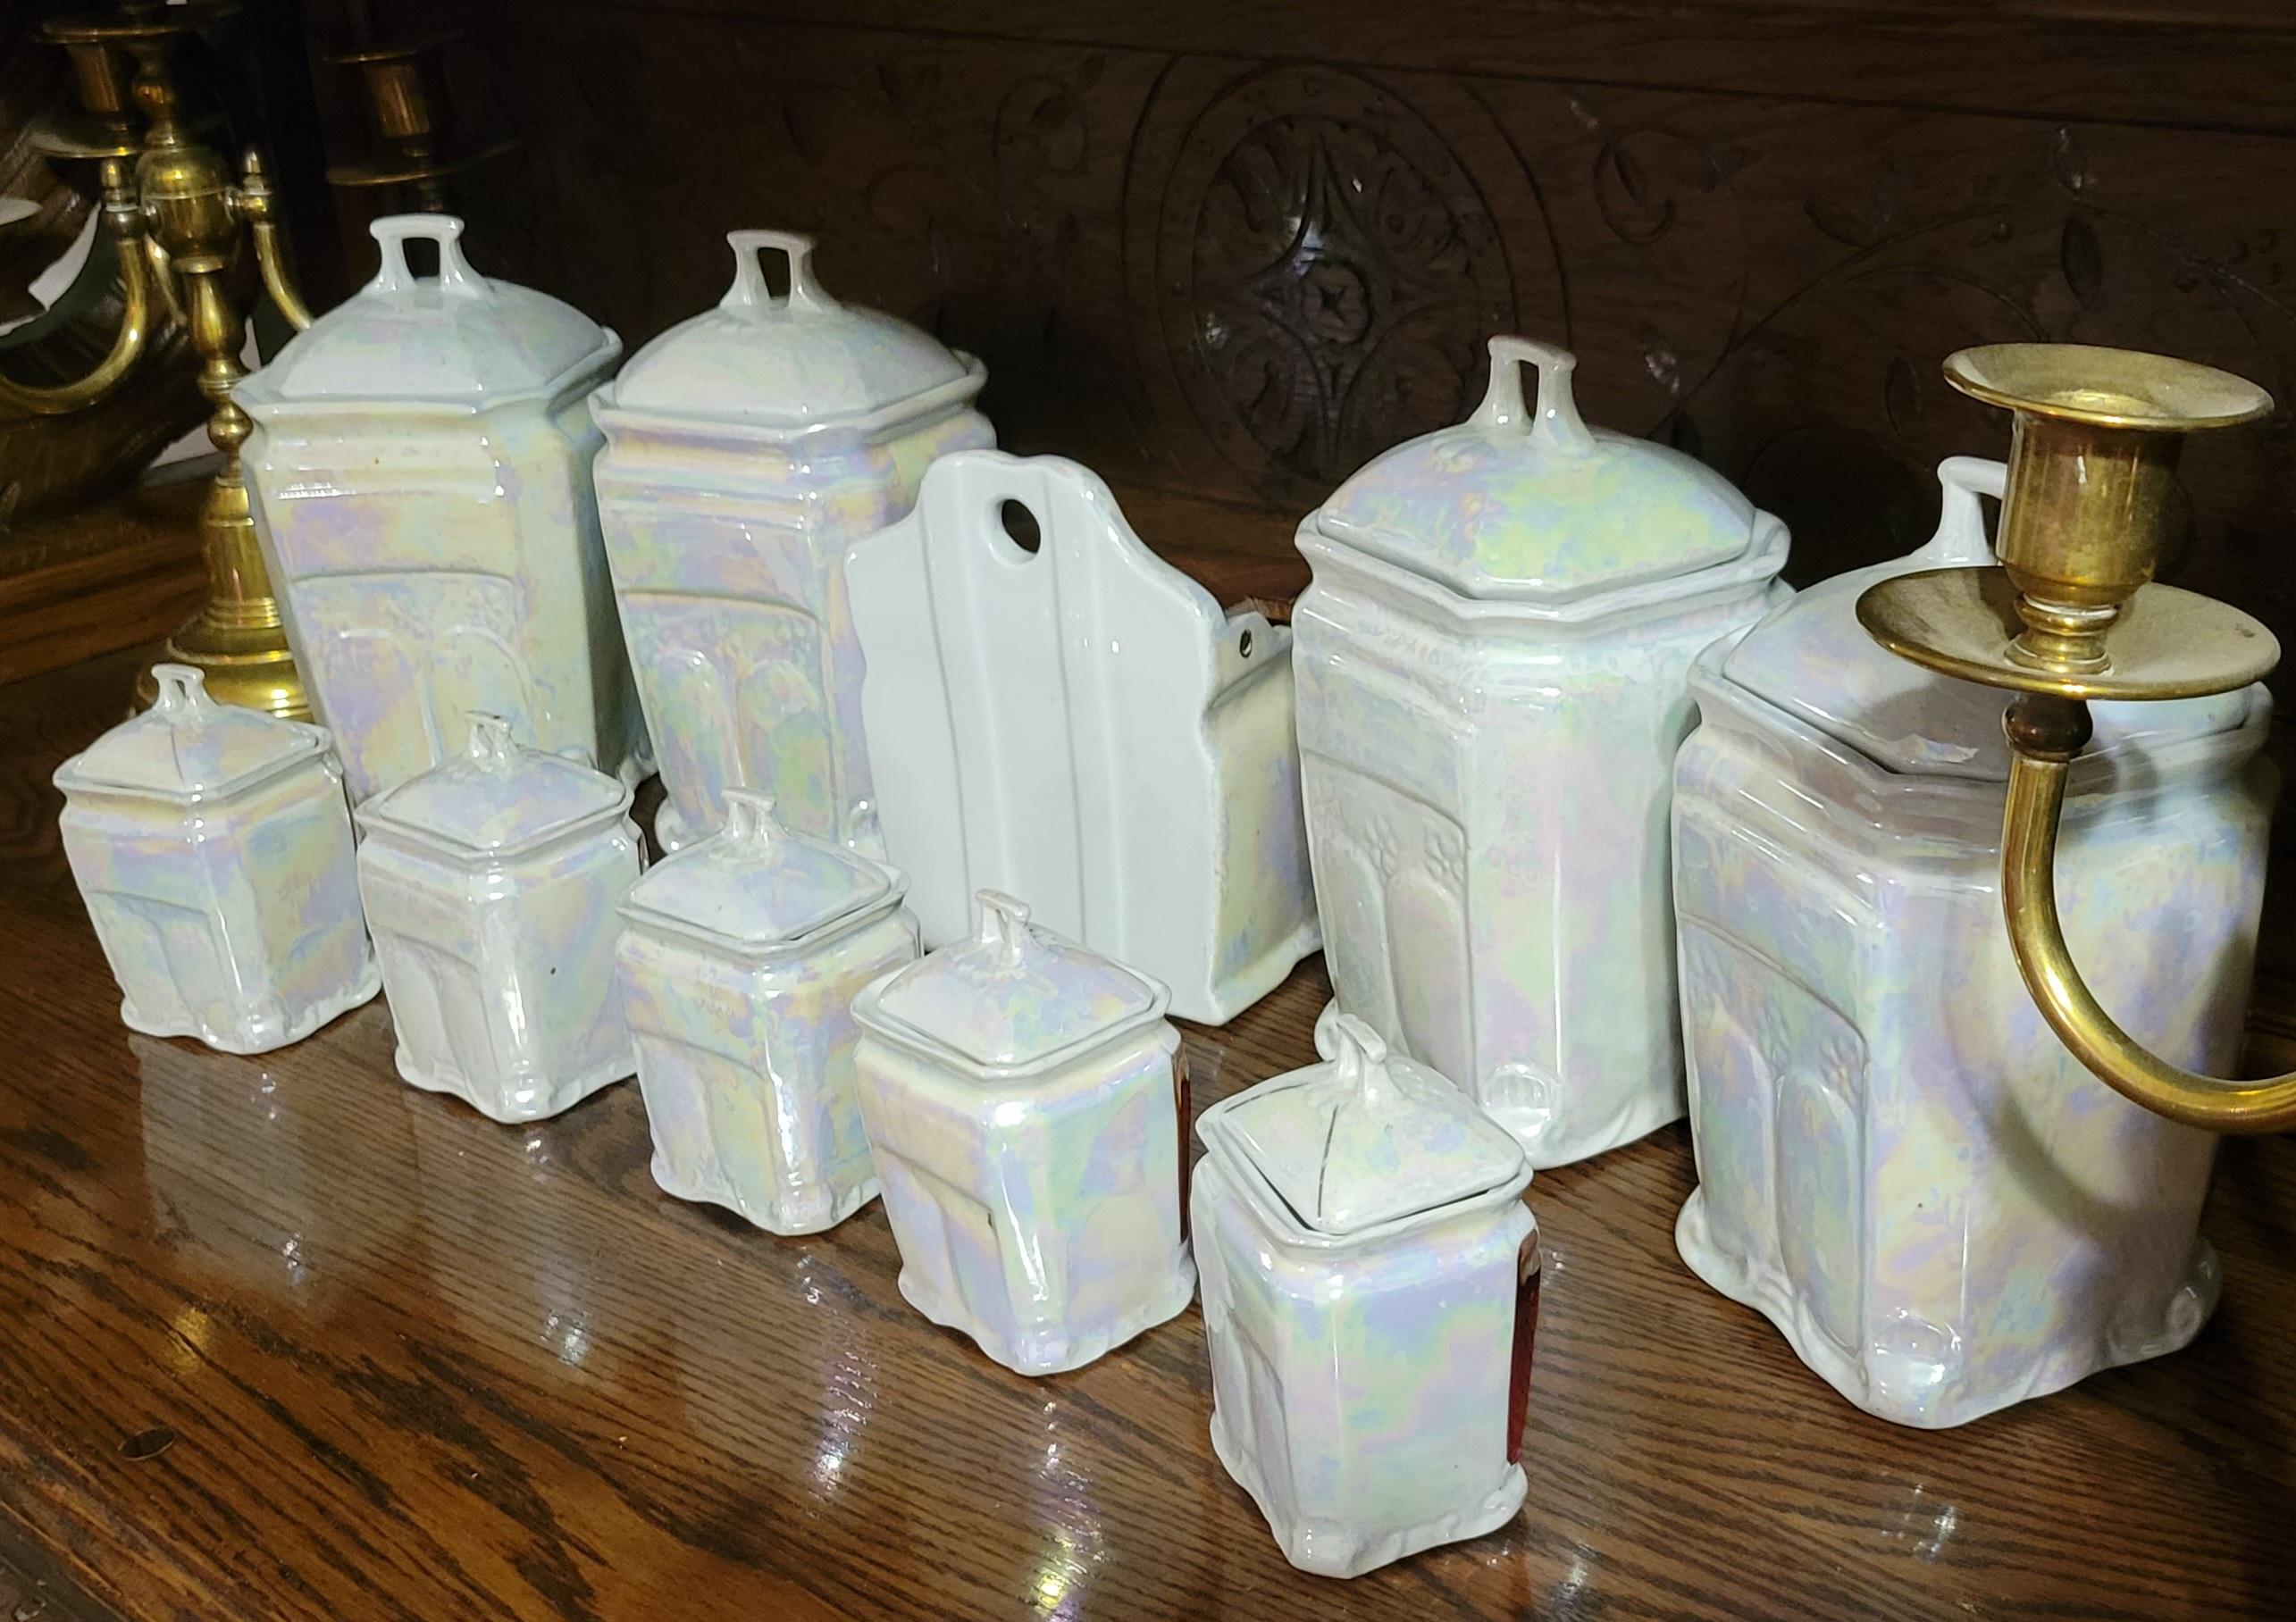 A set of 10 lusterware German porcelaine canisters.
A set includes:
(4) large canisters: Rice, Flower, Coffee, Sugar - about 5